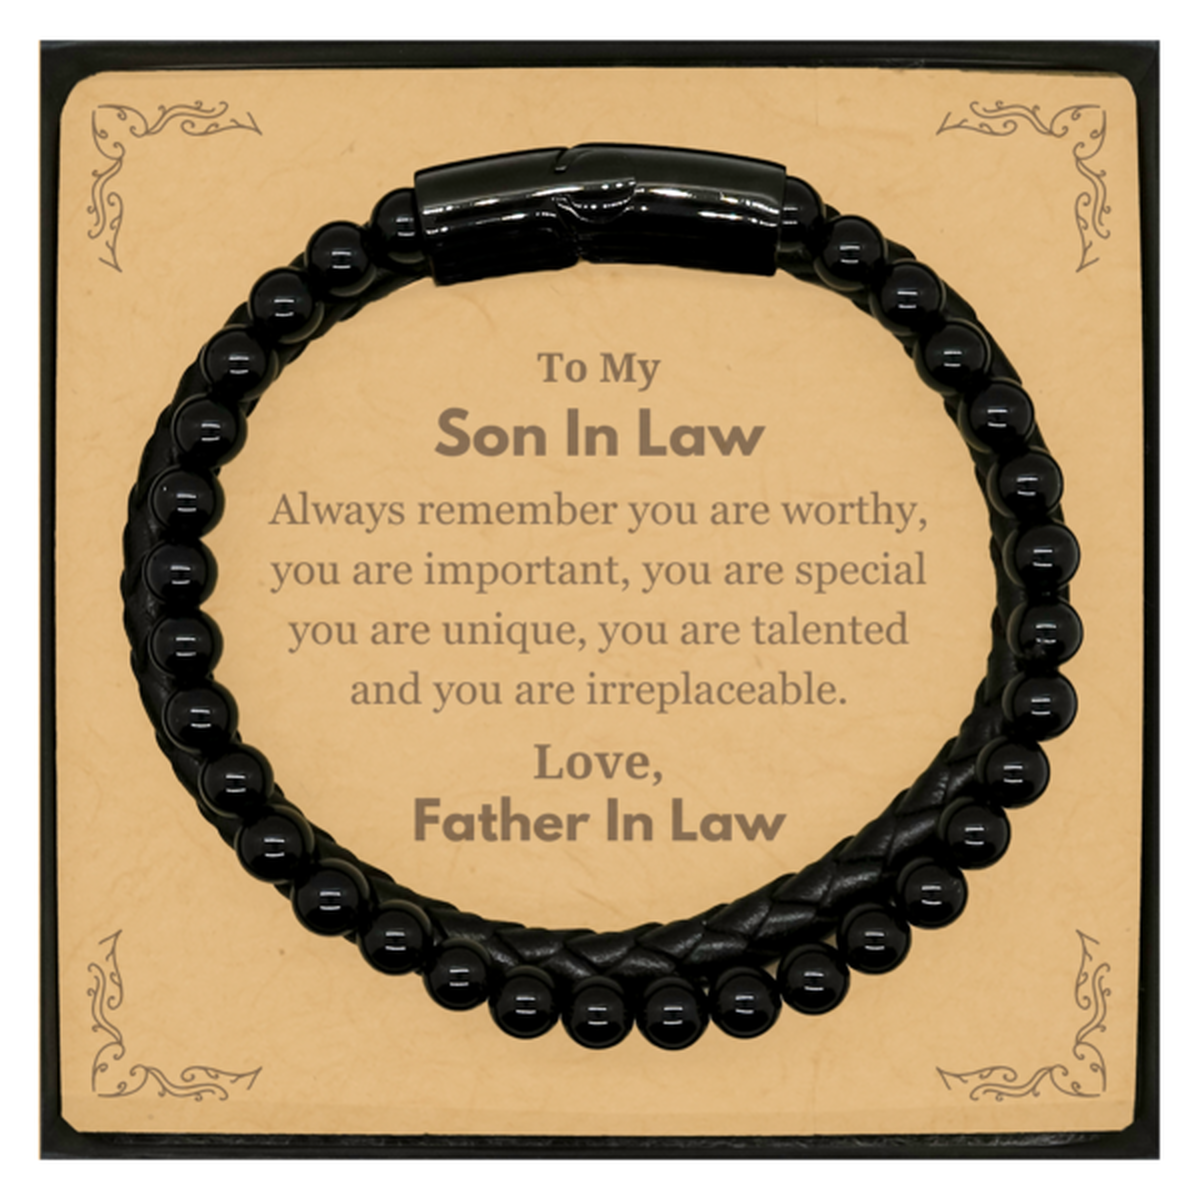 Son In Law Birthday Gifts from Father In Law, Inspirational Stone Leather Bracelets for Son In Law Christmas Graduation Gifts for Son In Law Always remember you are worthy, you are important. Love, Father In Law